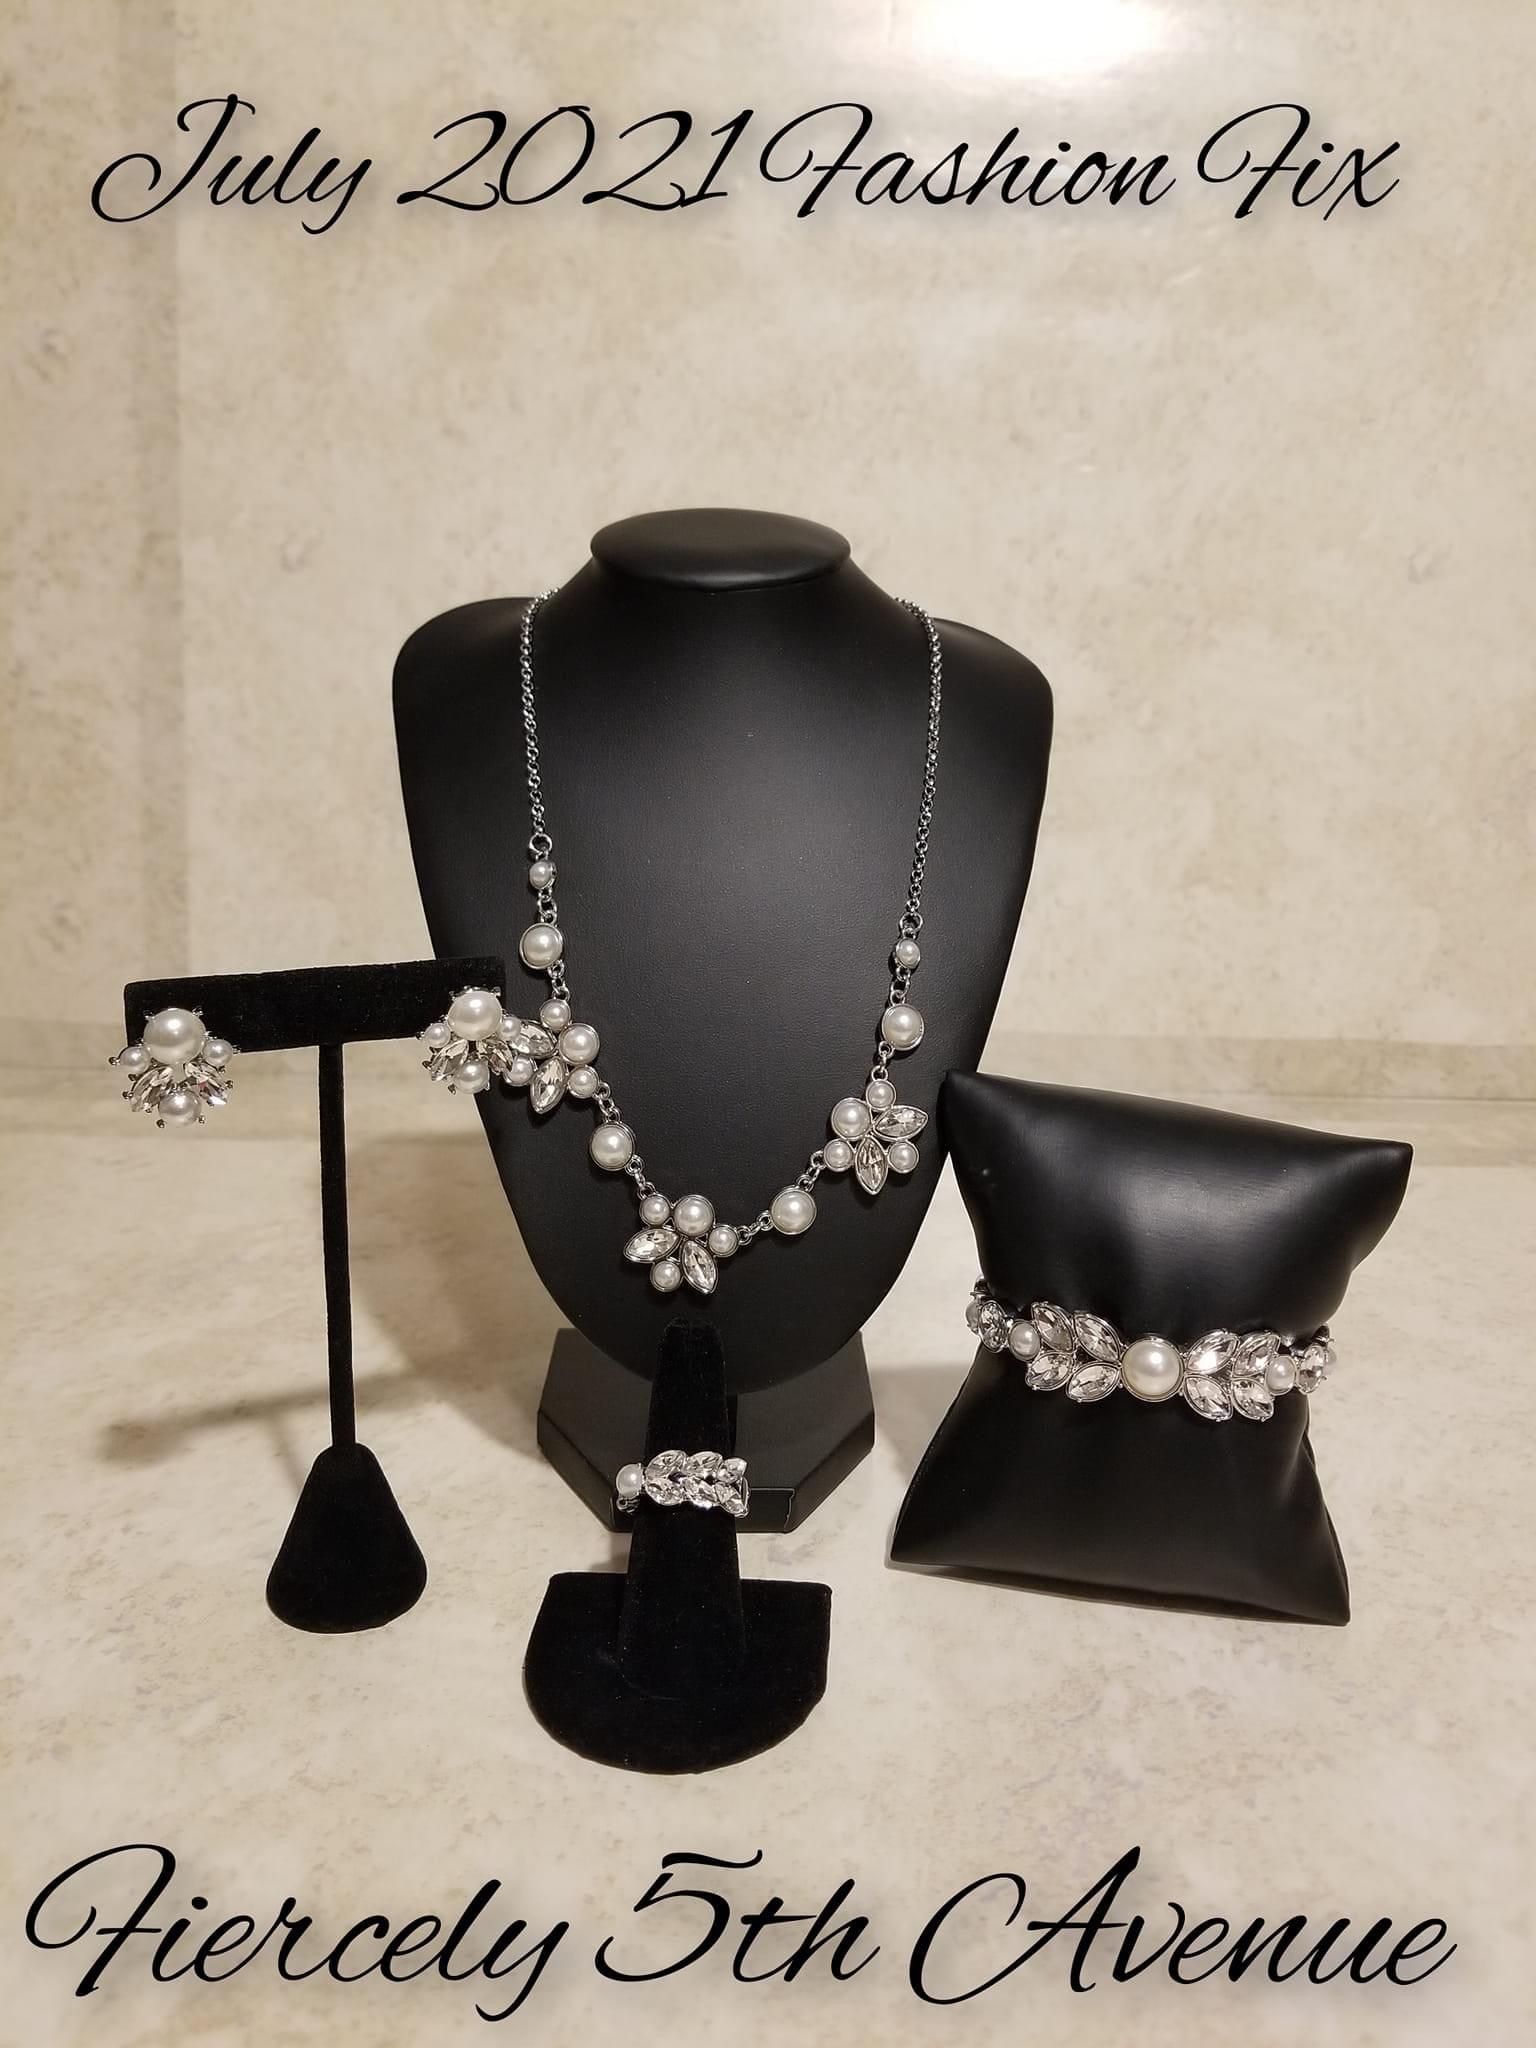 Paparazzi Accessories Fiercely 5th Avenue: FF July 2021 The styles featured in the Fiercely 5th Avenue collection are exactly what you would expect with a name like that: Sleek, classy, metallic designs that you’d find on the streets of New York. The acce